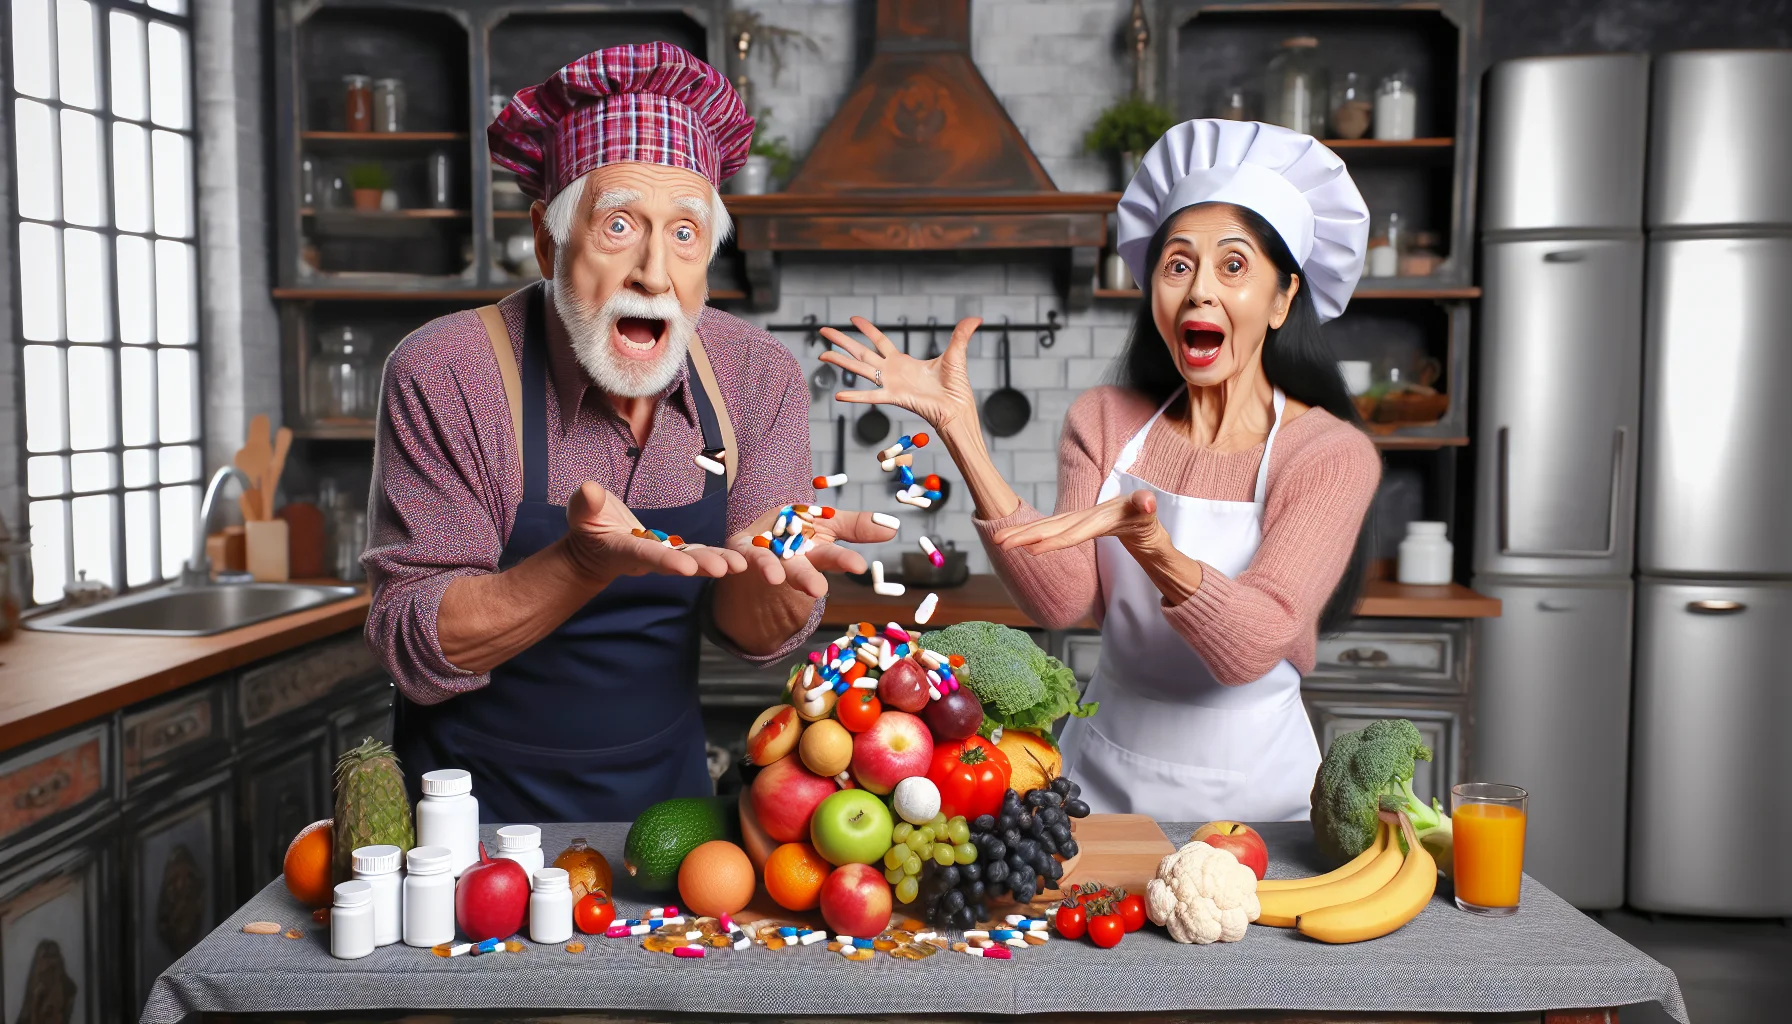 Create an amusing, realistic scene spotlighting the concept of anti-aging supplements. Picture an elderly Caucasian man and a South Asian woman, both in their golden years, hosting a lively cooking show. They're in a charming, old-fashioned kitchen, fussing over a giant pile of fruits, vegetables, and dietary supplements. They're both wearing vibrant chef hats and aprons, the man juggling vitamins like a circus performer while the woman gazes in mock astonishment. The atmosphere is light-hearted, filled with healthy foods and laughter, capturing the funnier side of health, dieting, and staying young at heart.